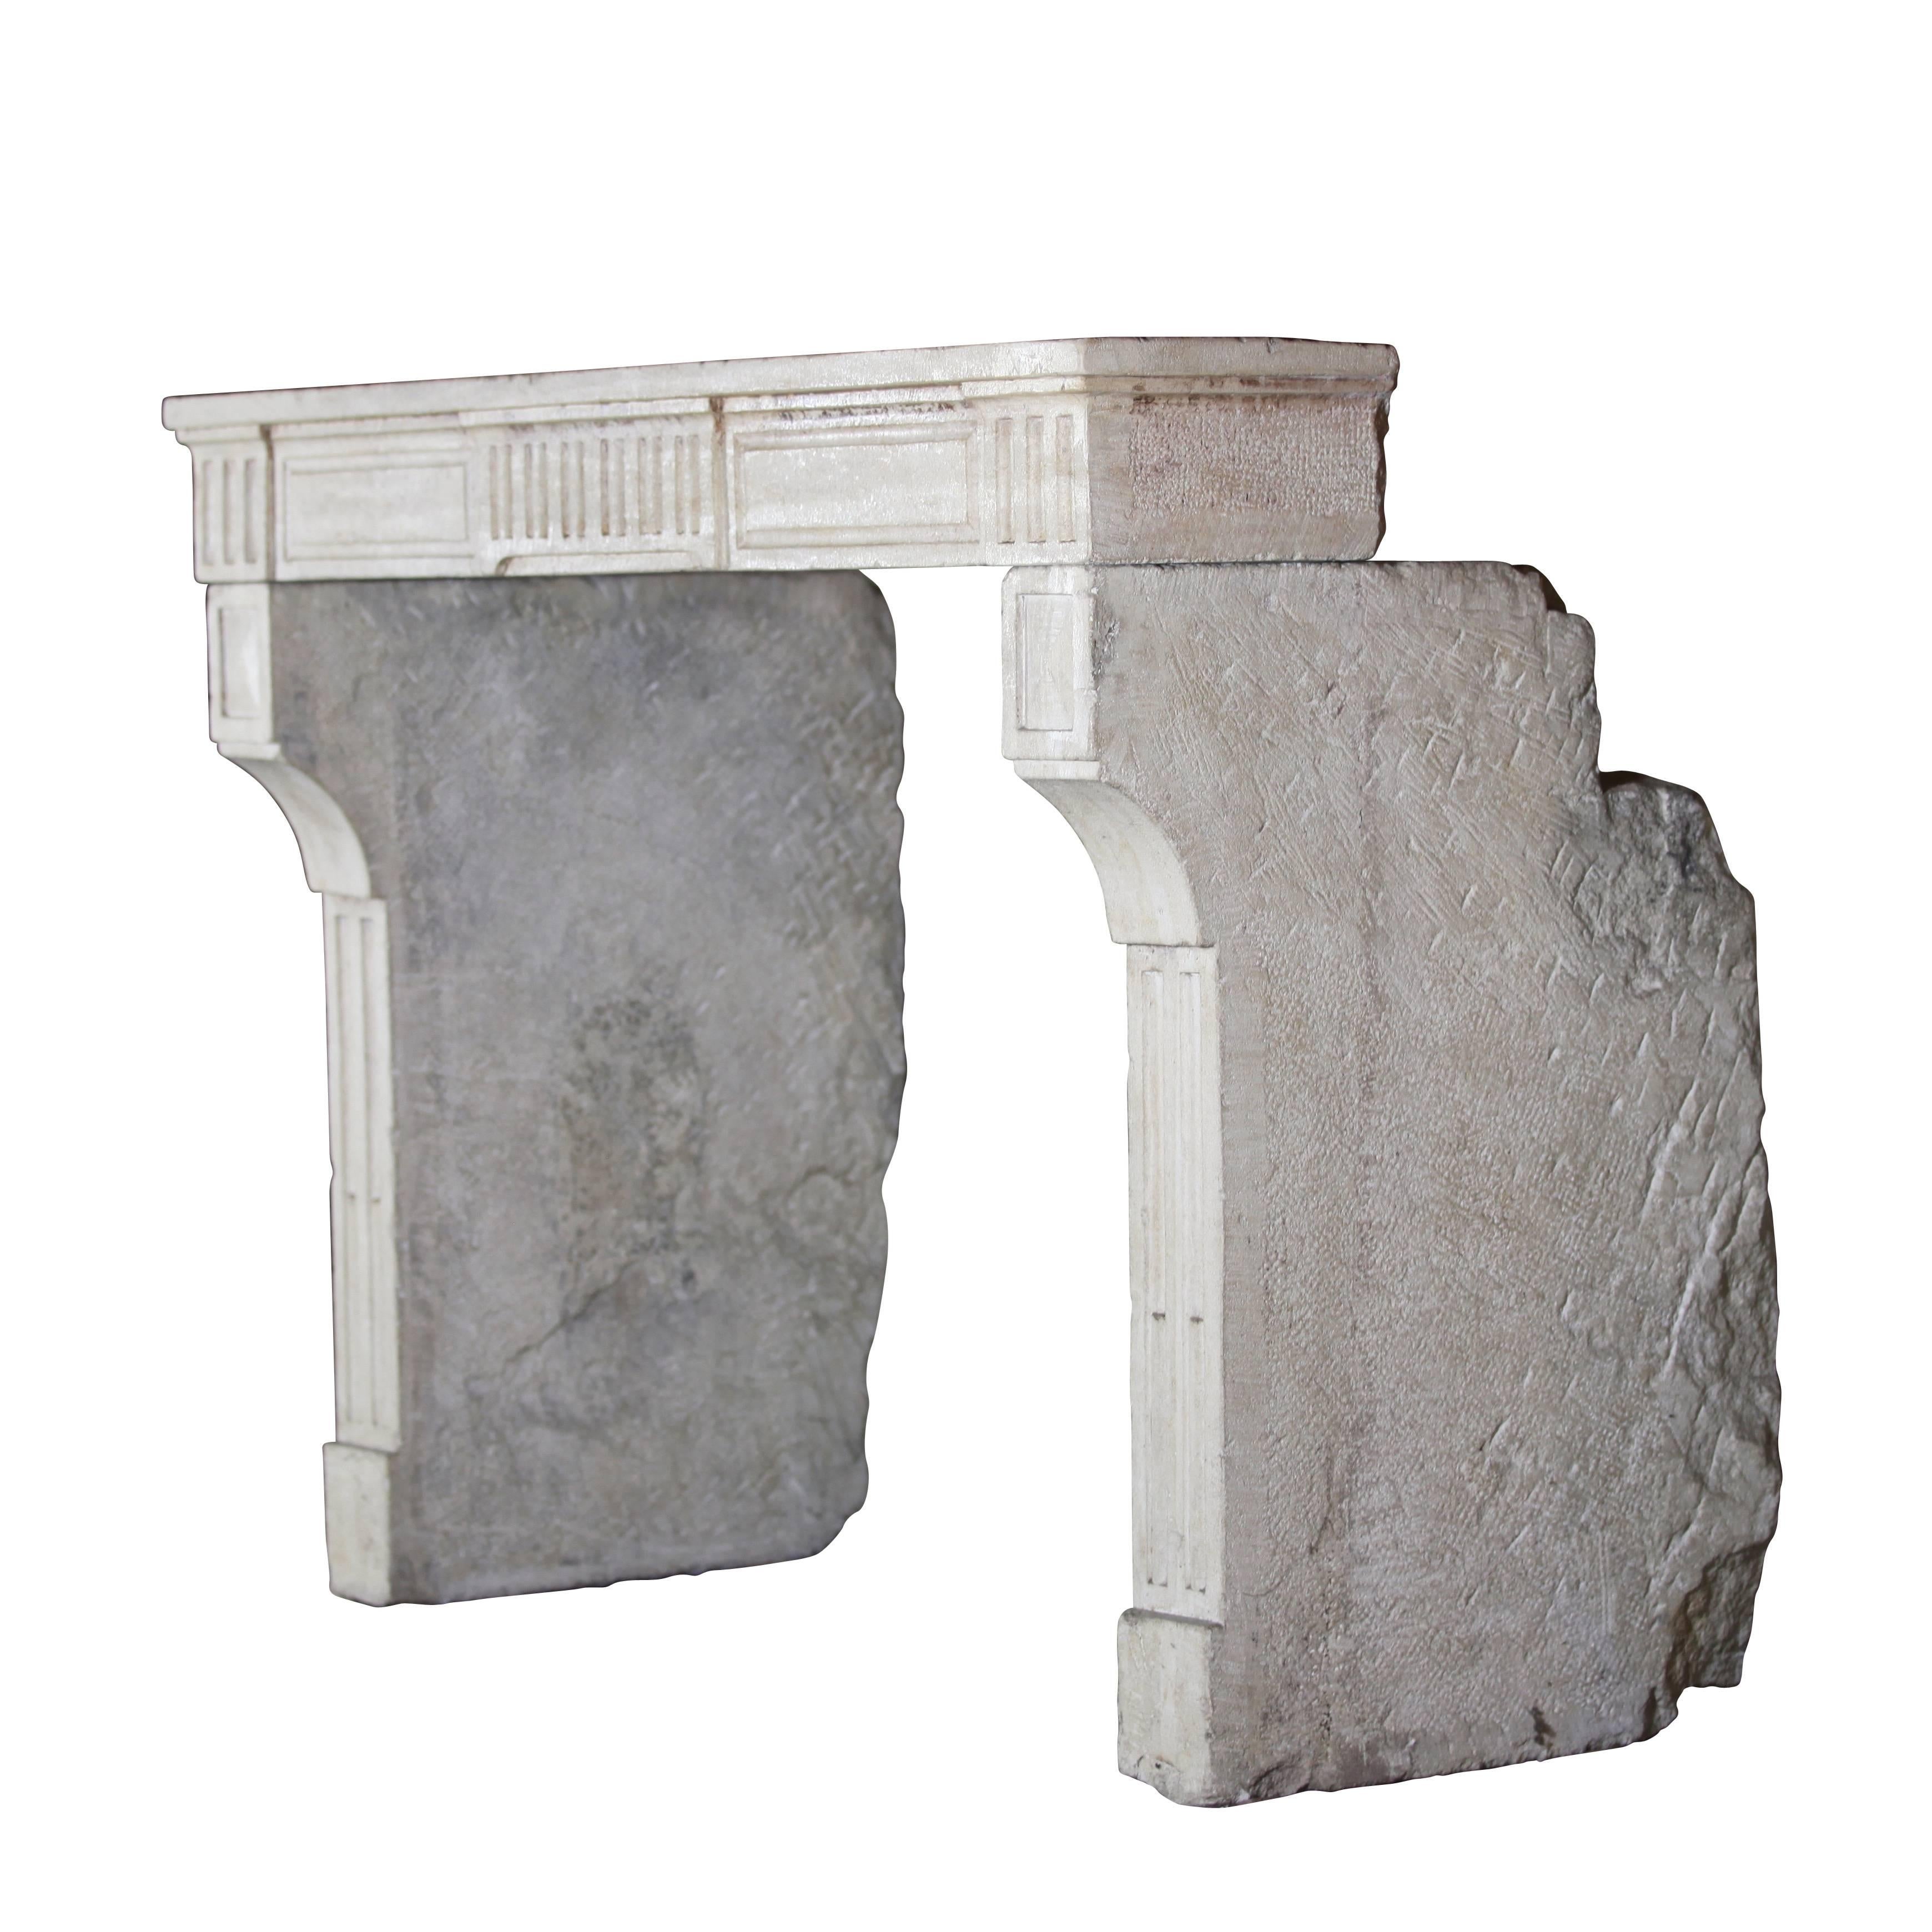 Beautiful French country petite fireplace mantel (fireplace) in limestone with diamond point detail on the jambs. The limestone is the kind that reflects the candle light and lamp light in a room thanks to its glossy ancient surface. It has very